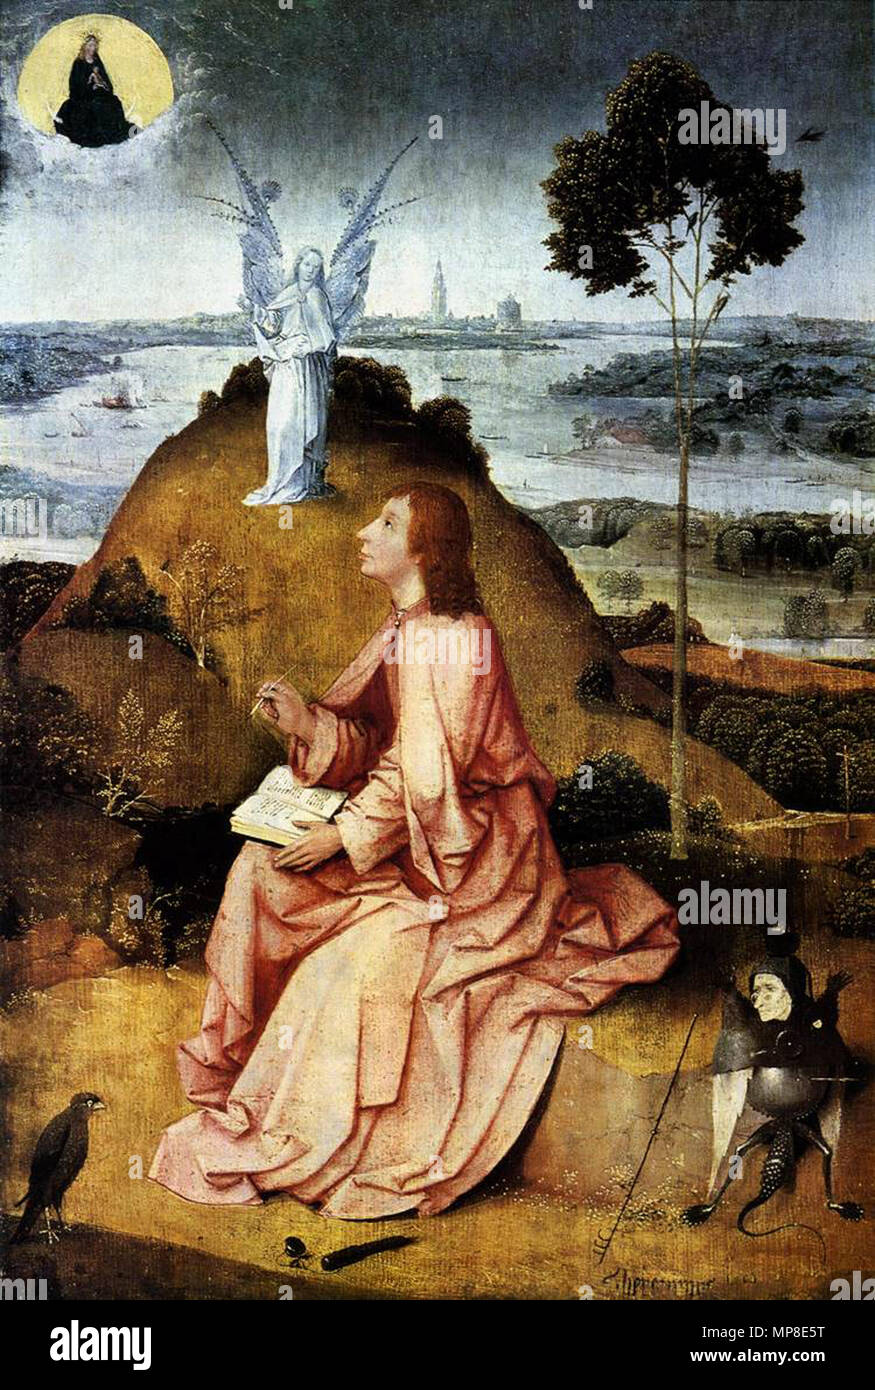 Saint John the Evangelist on Patmos. Alternative title(s): Saint John on Patmos.[1] St. John on Patmos.[2]. Front of a two-sided painting. For the reverse, see File:Jheronimus Bosch Scenes from the Passion (full).jpg. circa 1489.   729 Johannes op Patmos Jeroen Bosch Stock Photo